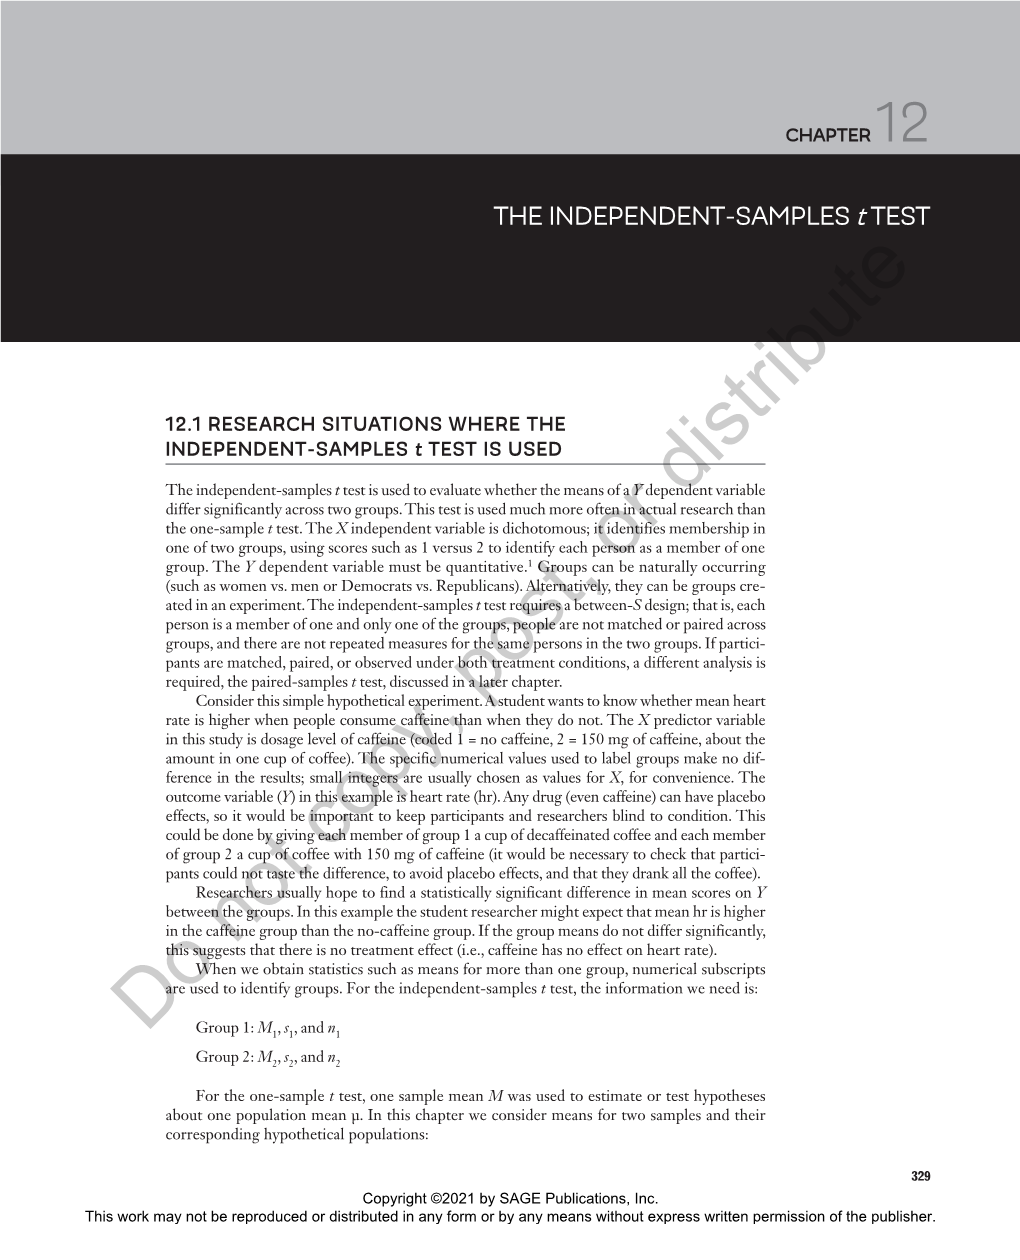 THE INDEPENDENT-SAMPLES T TEST